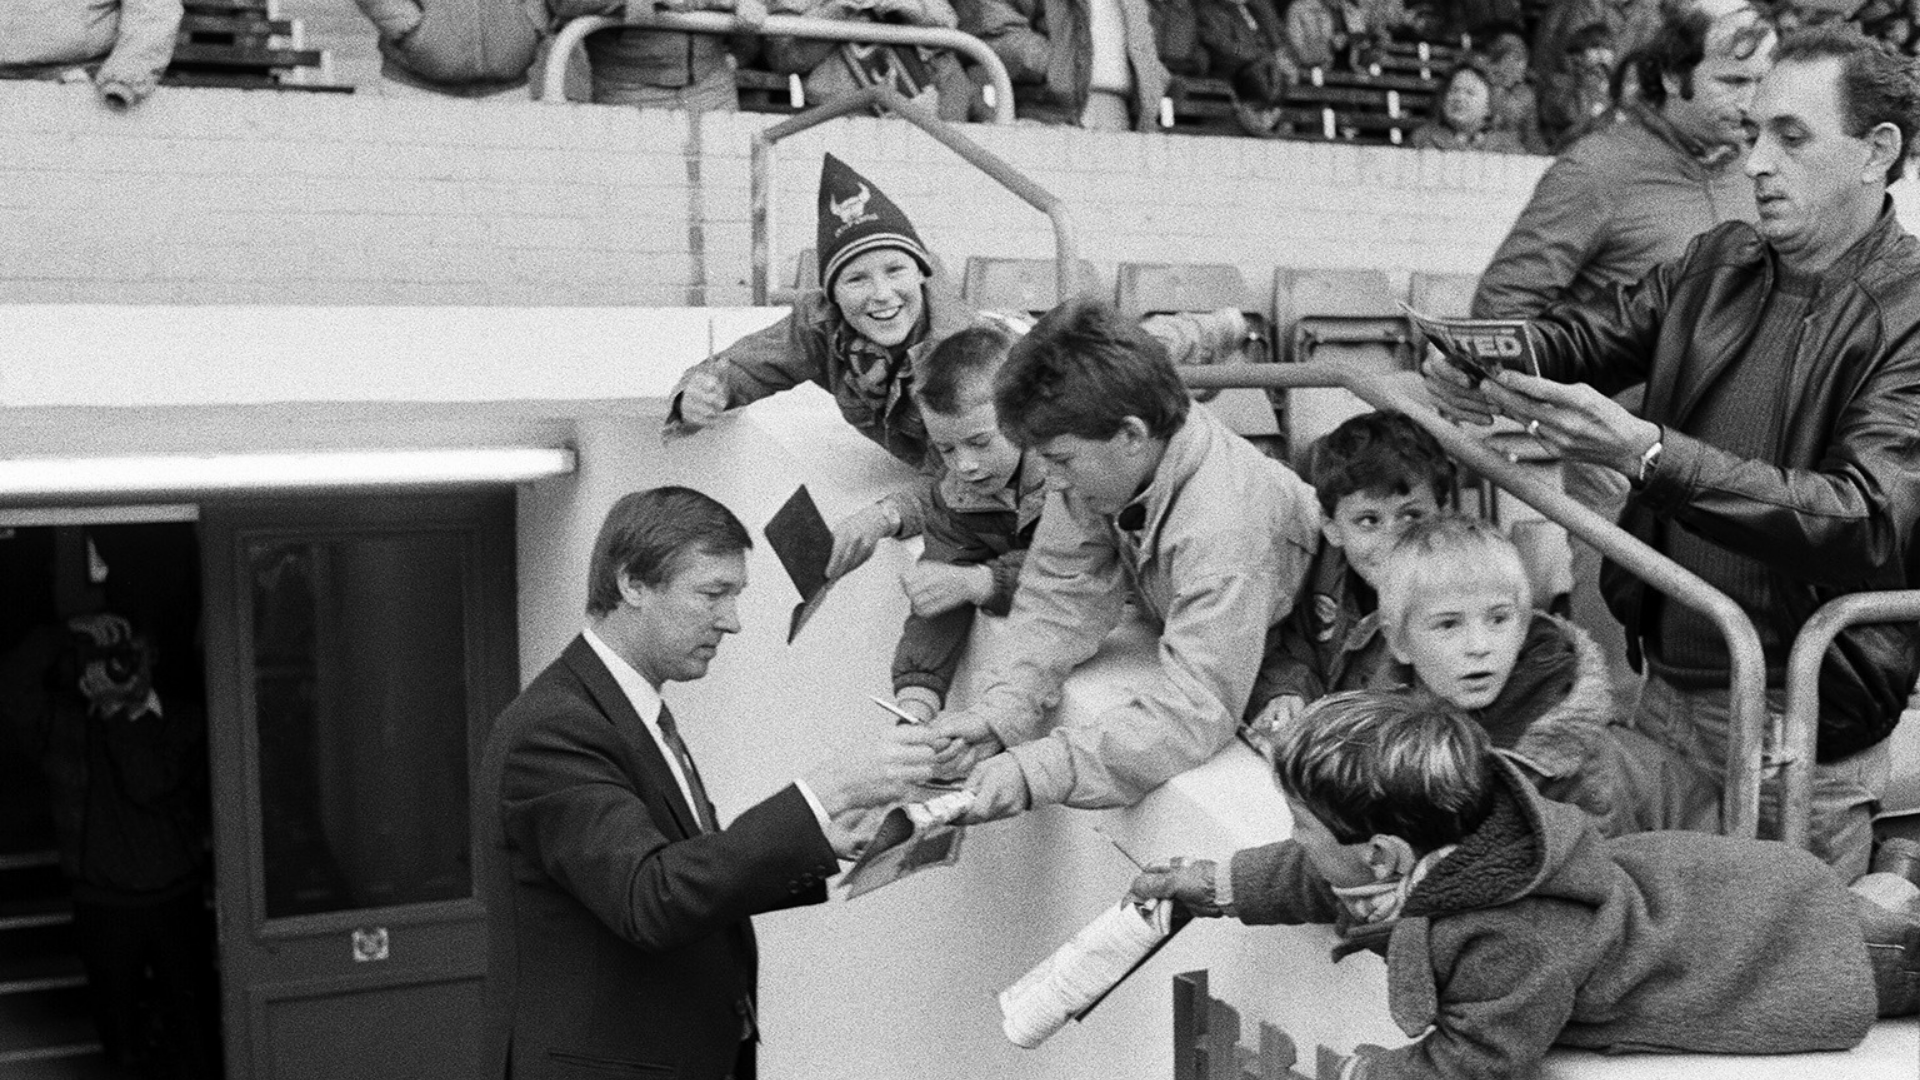 Alex Ferguson before his first match as Manchester United boss in 1986. Photo: Staf/Mirrorpix/Getty Images